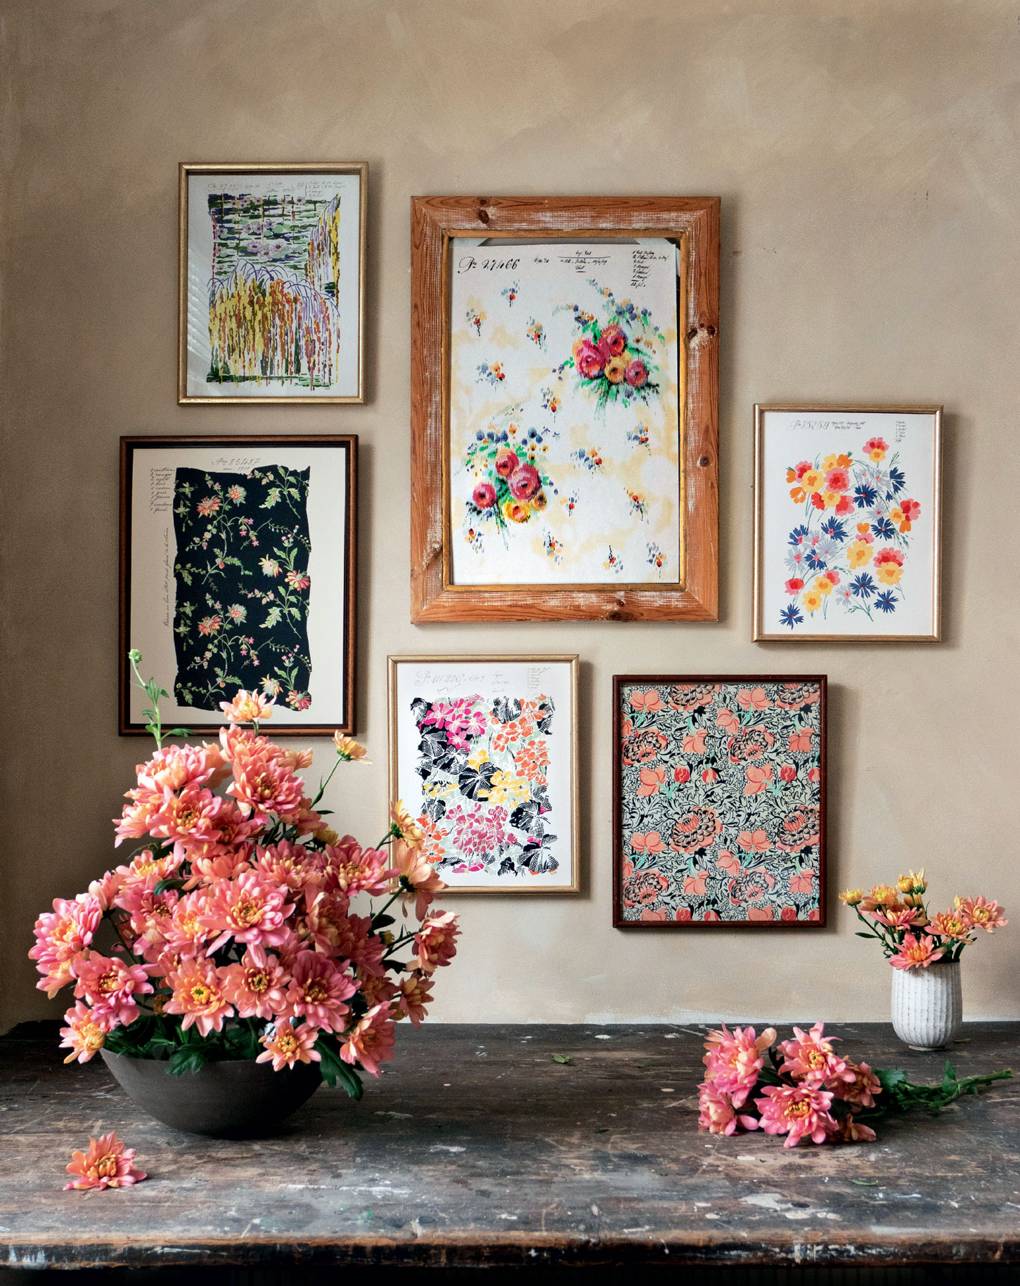 Where to buy affordable prints | House & Garden